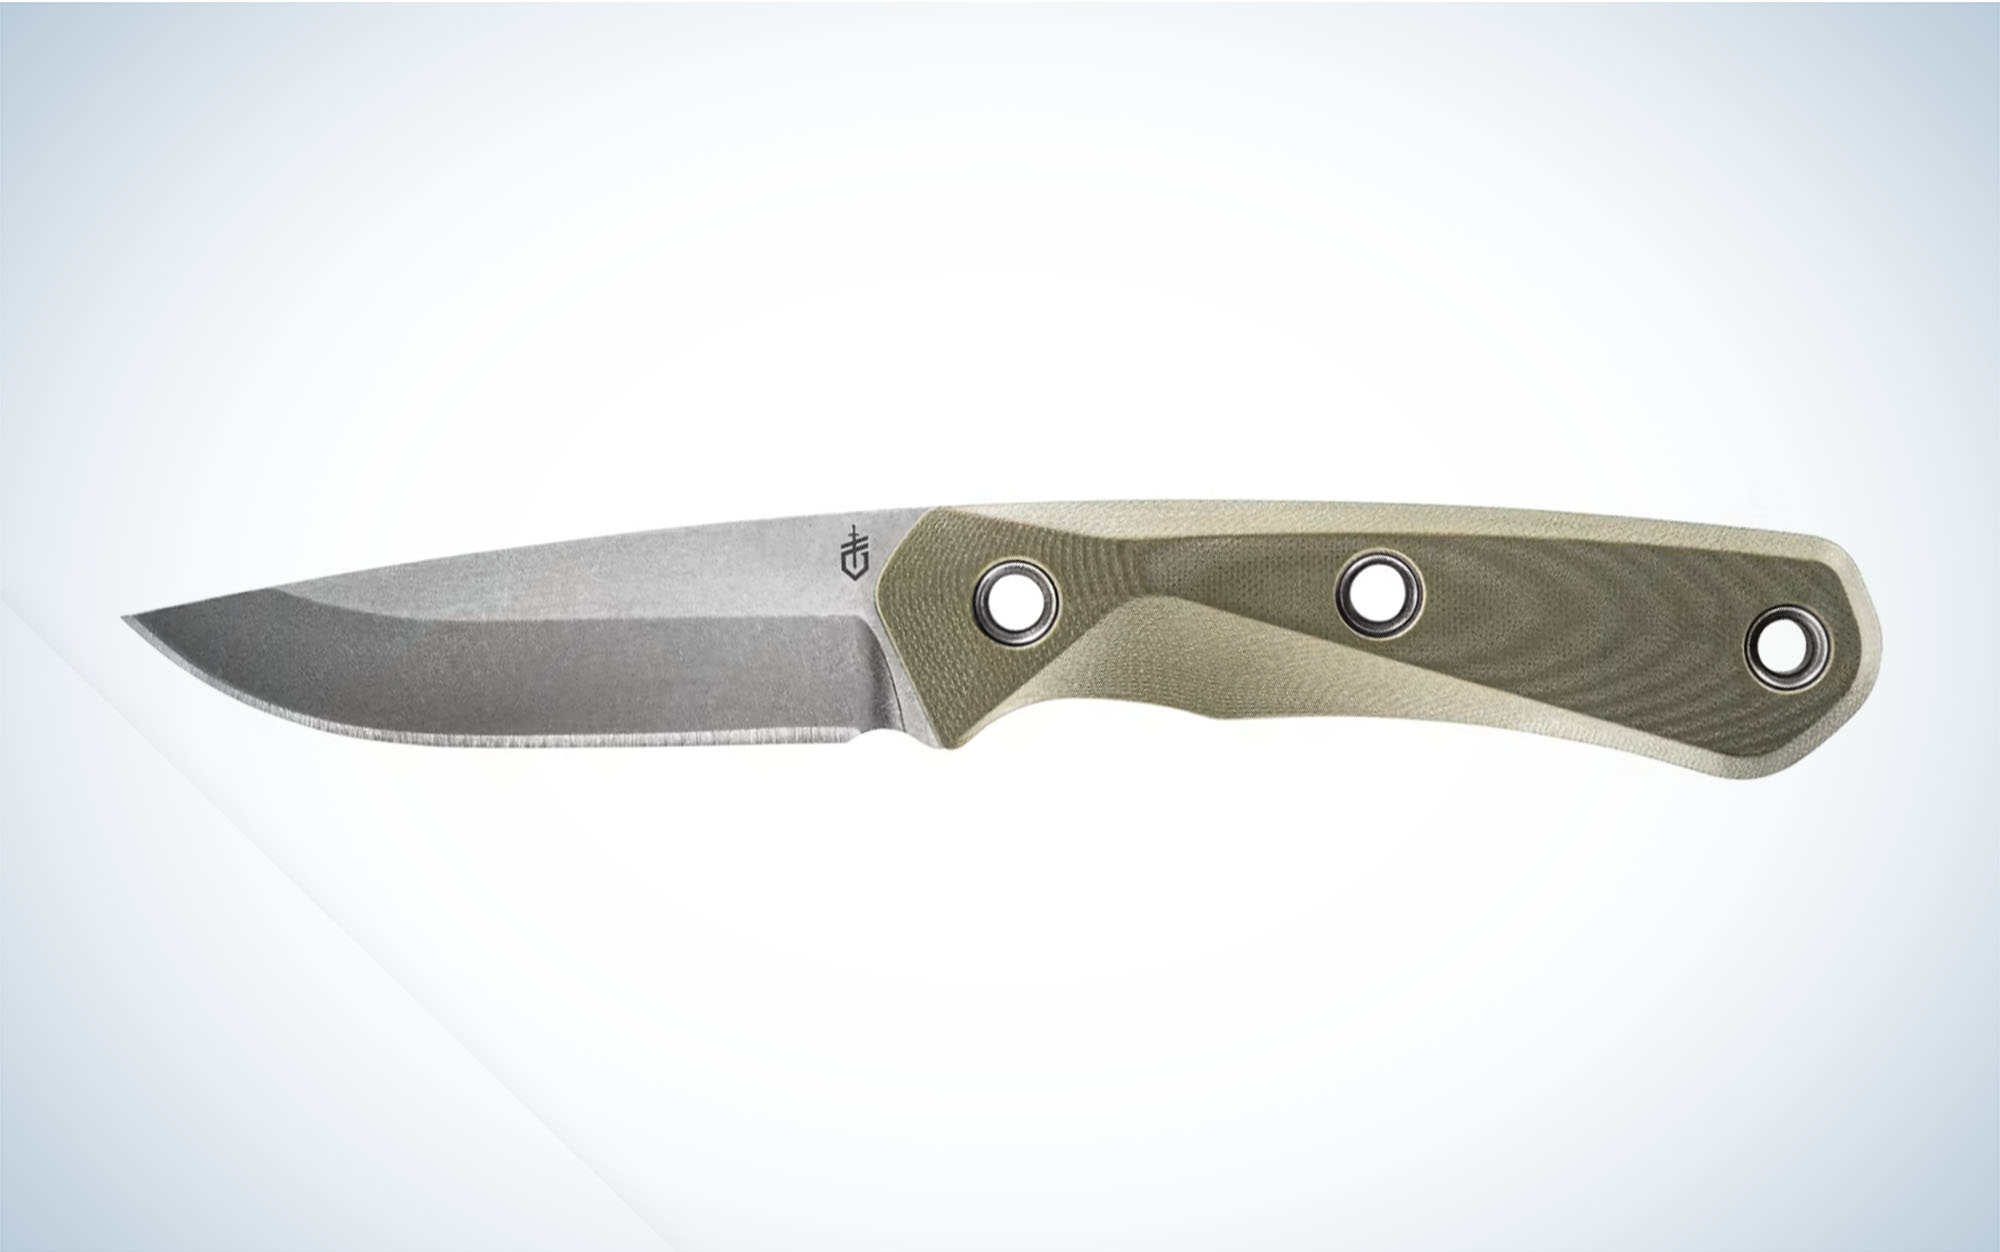 We tested the Gerber Terracraft.